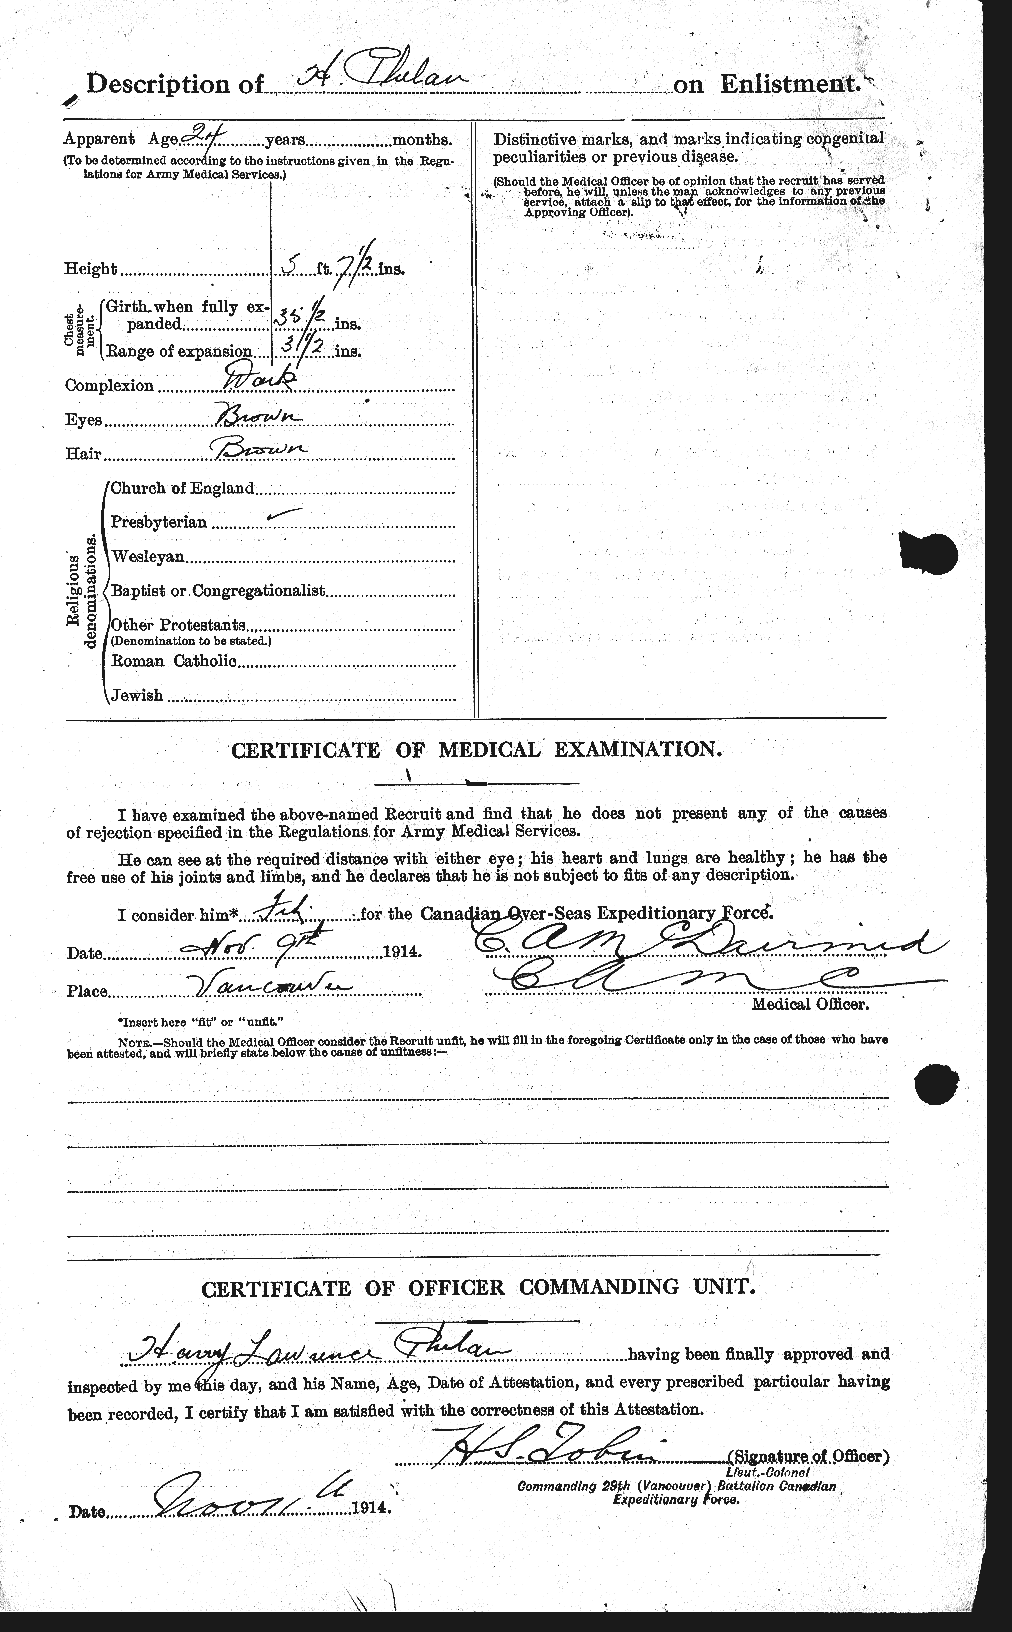 Personnel Records of the First World War - CEF 576950b